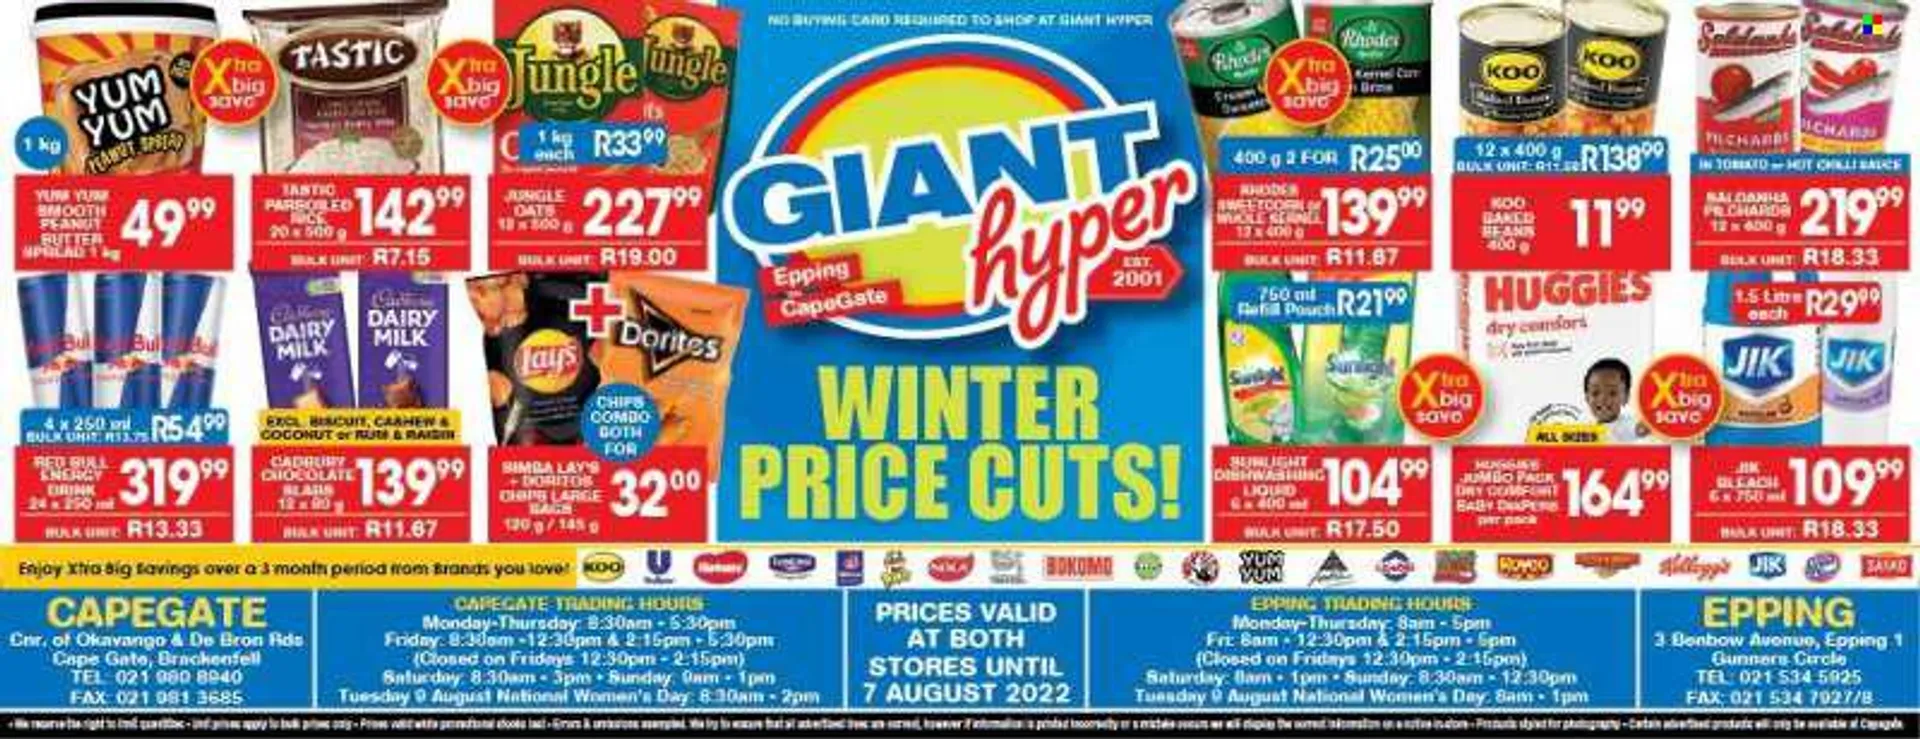 Giant Hyper catalogue  - 29/07/2022 - 07/08/2022 - Sales products - beans, sardines, chocolate, chocolate slabs, Kelloggs, biscuit, Cadbury, Dairy Milk, Doritos, chips, Lays, Simba, oats, baked beans, Koo, jungle oats, Tastic, energy drink, rum, Huggies, 